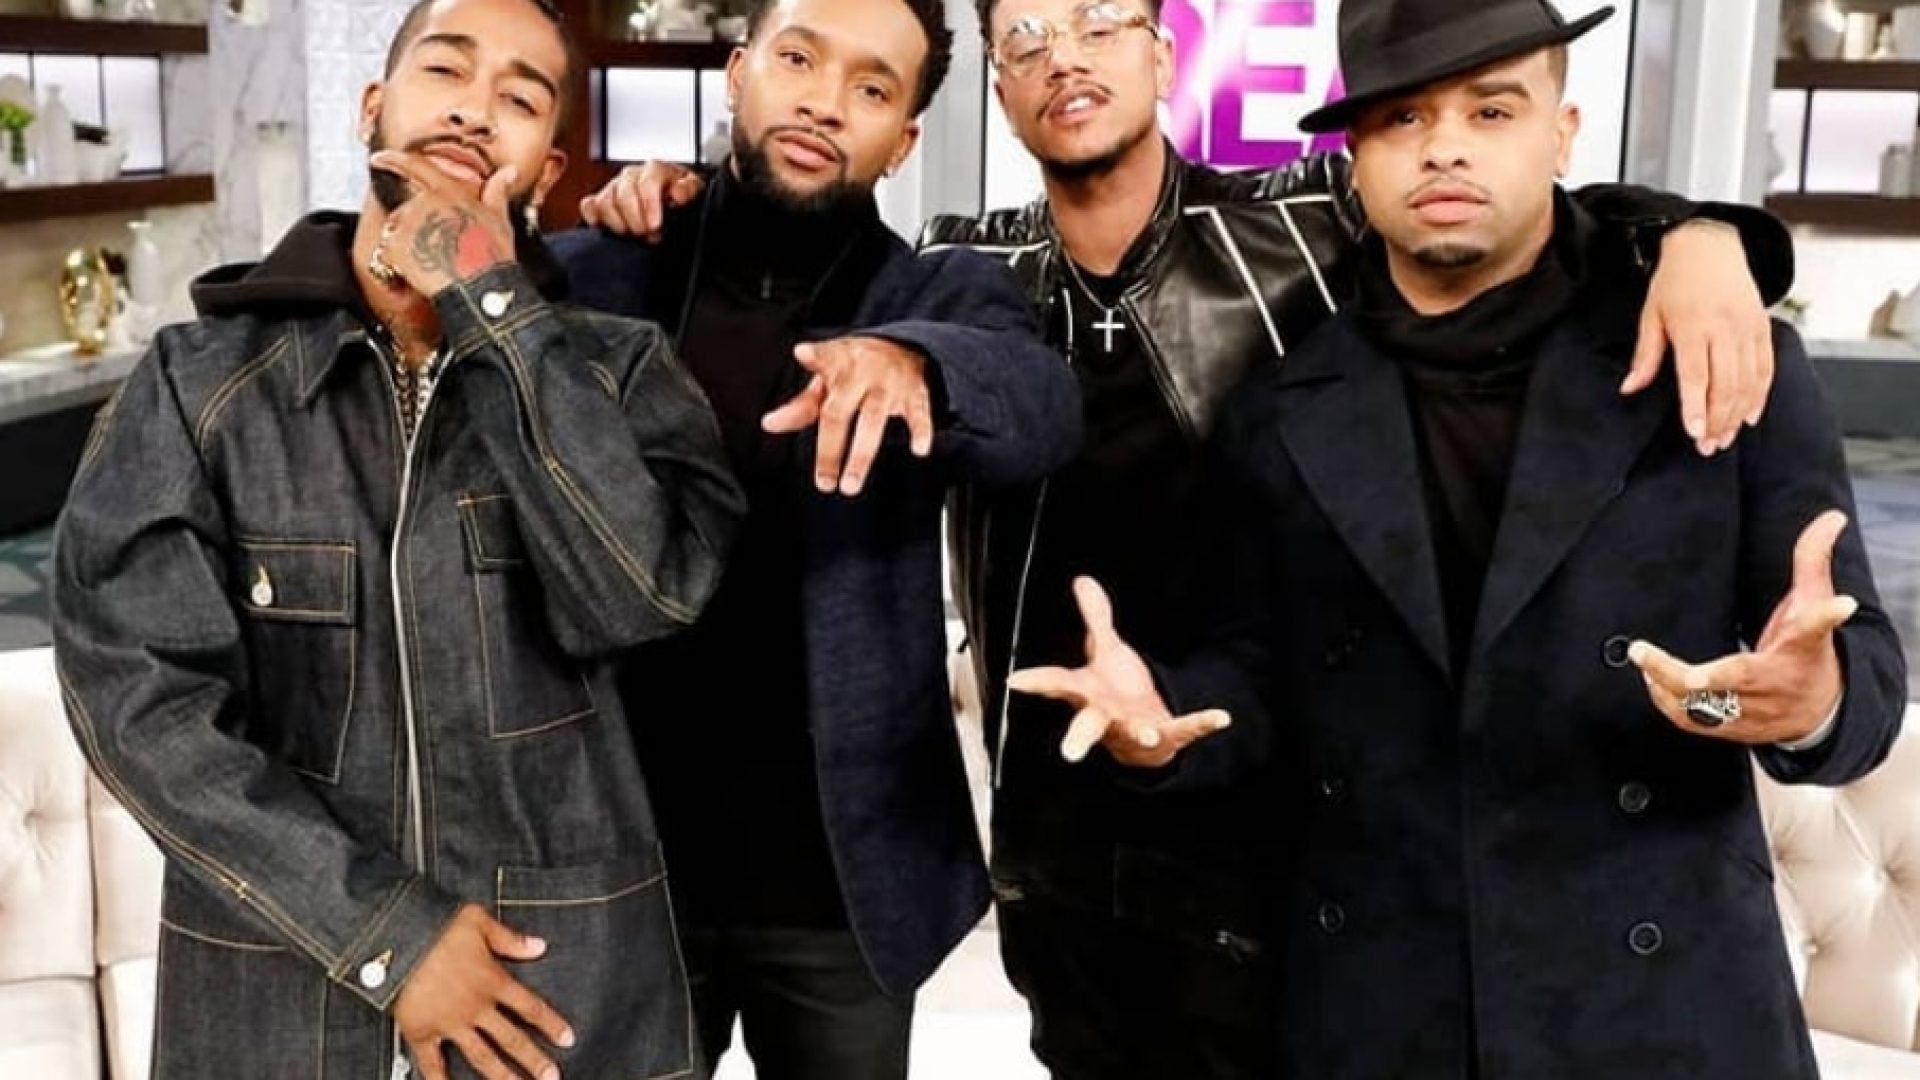 B2K Breaks Their Silence After Reunion Tour Drama: 'We're Good'